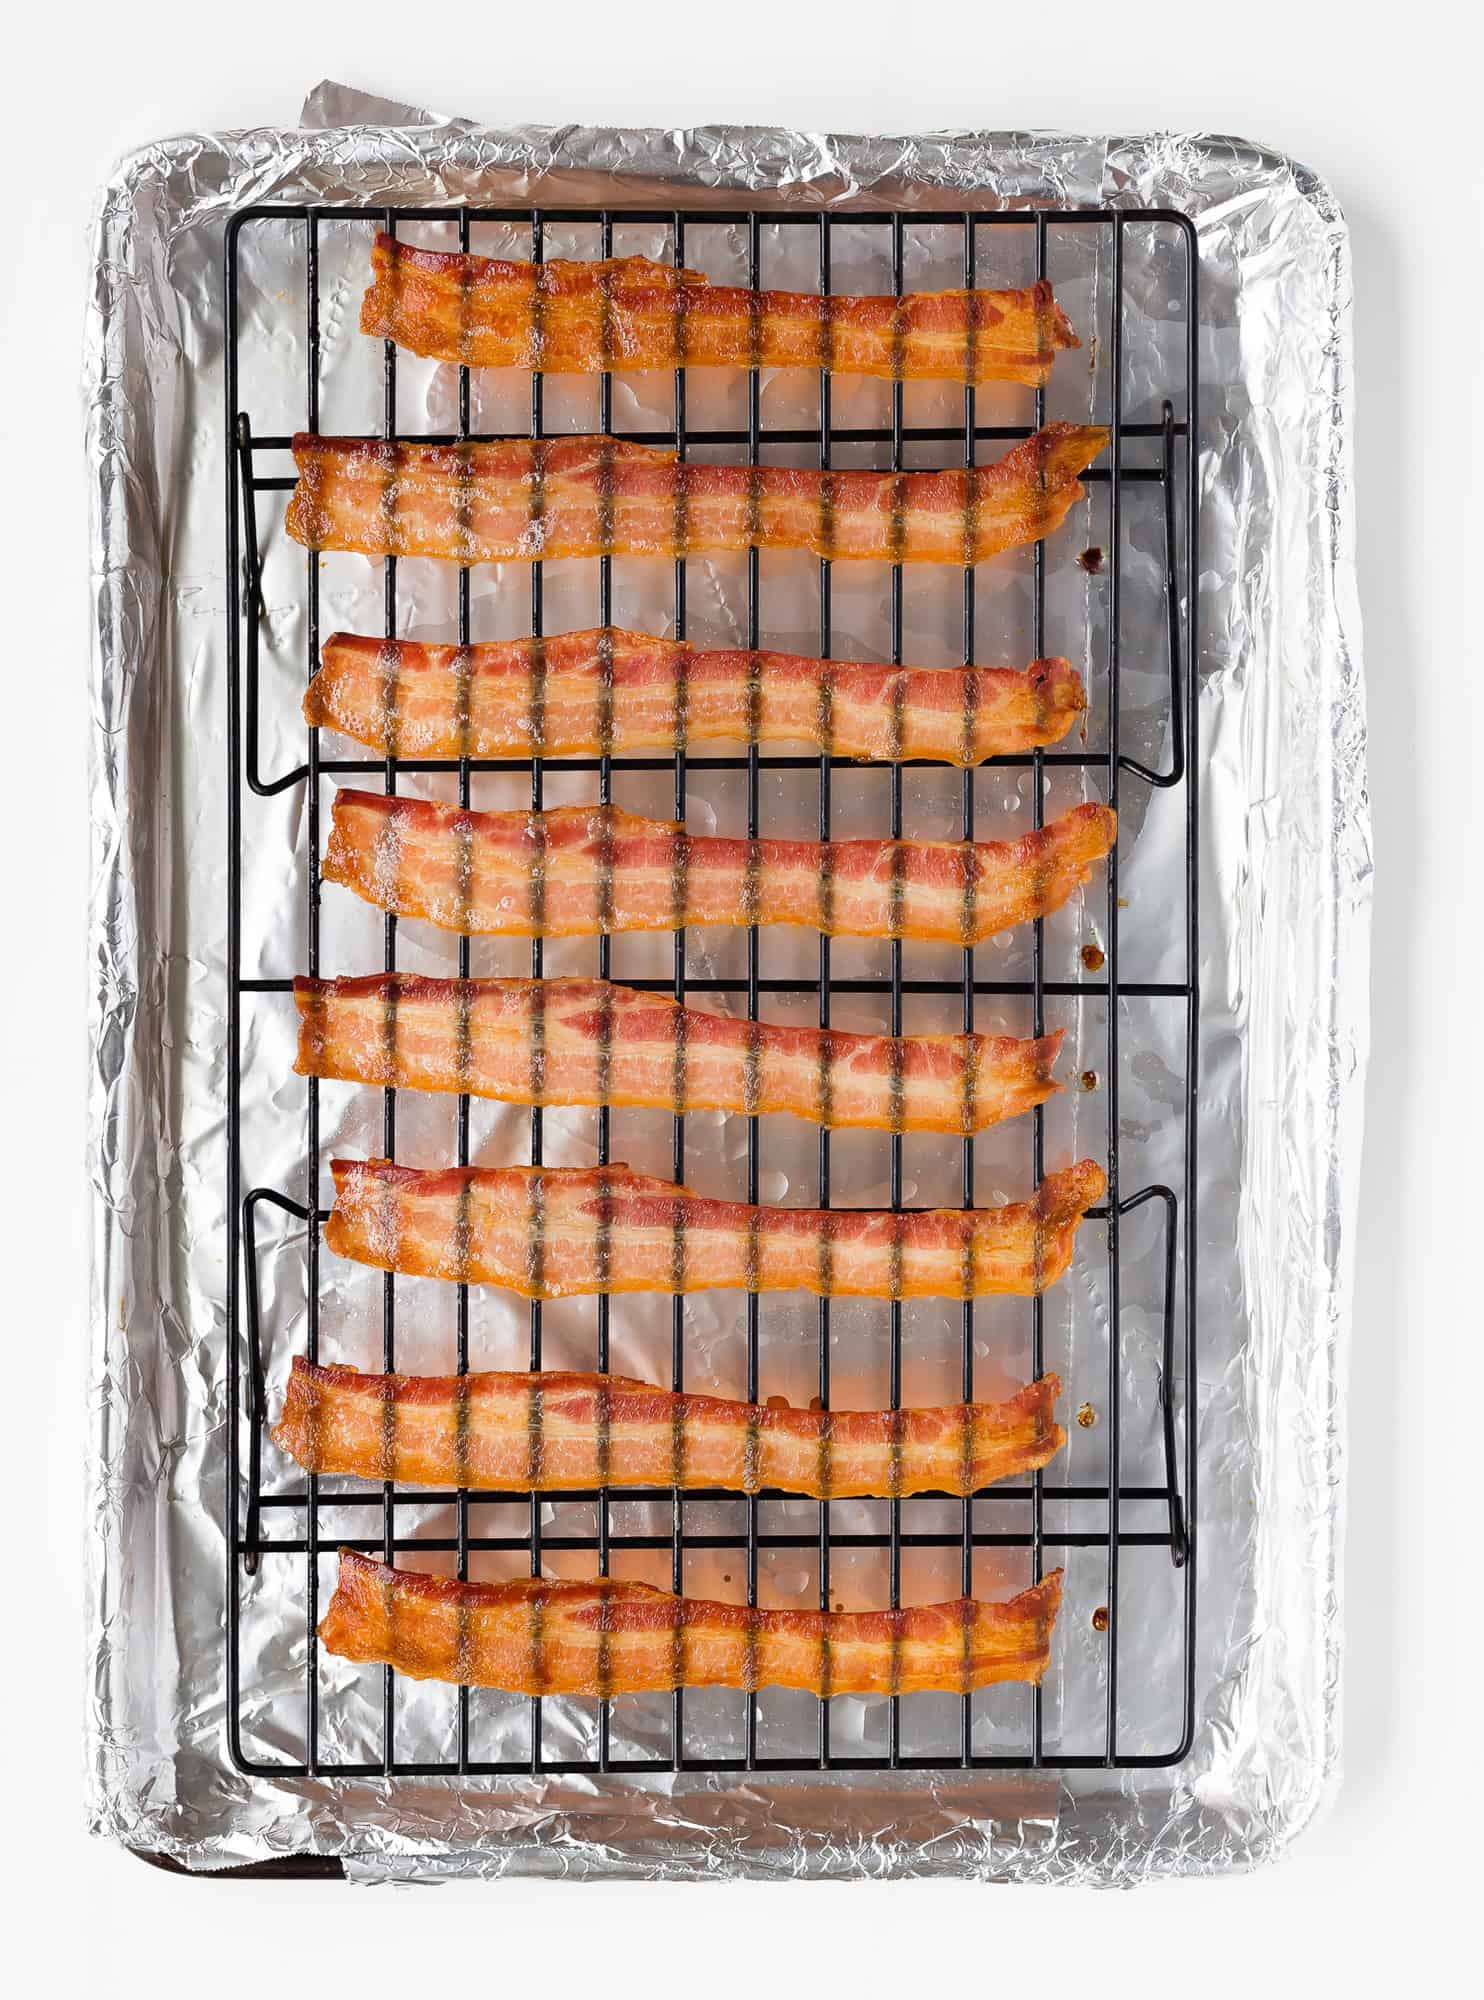 Crispy baked bacon on a wire rack.